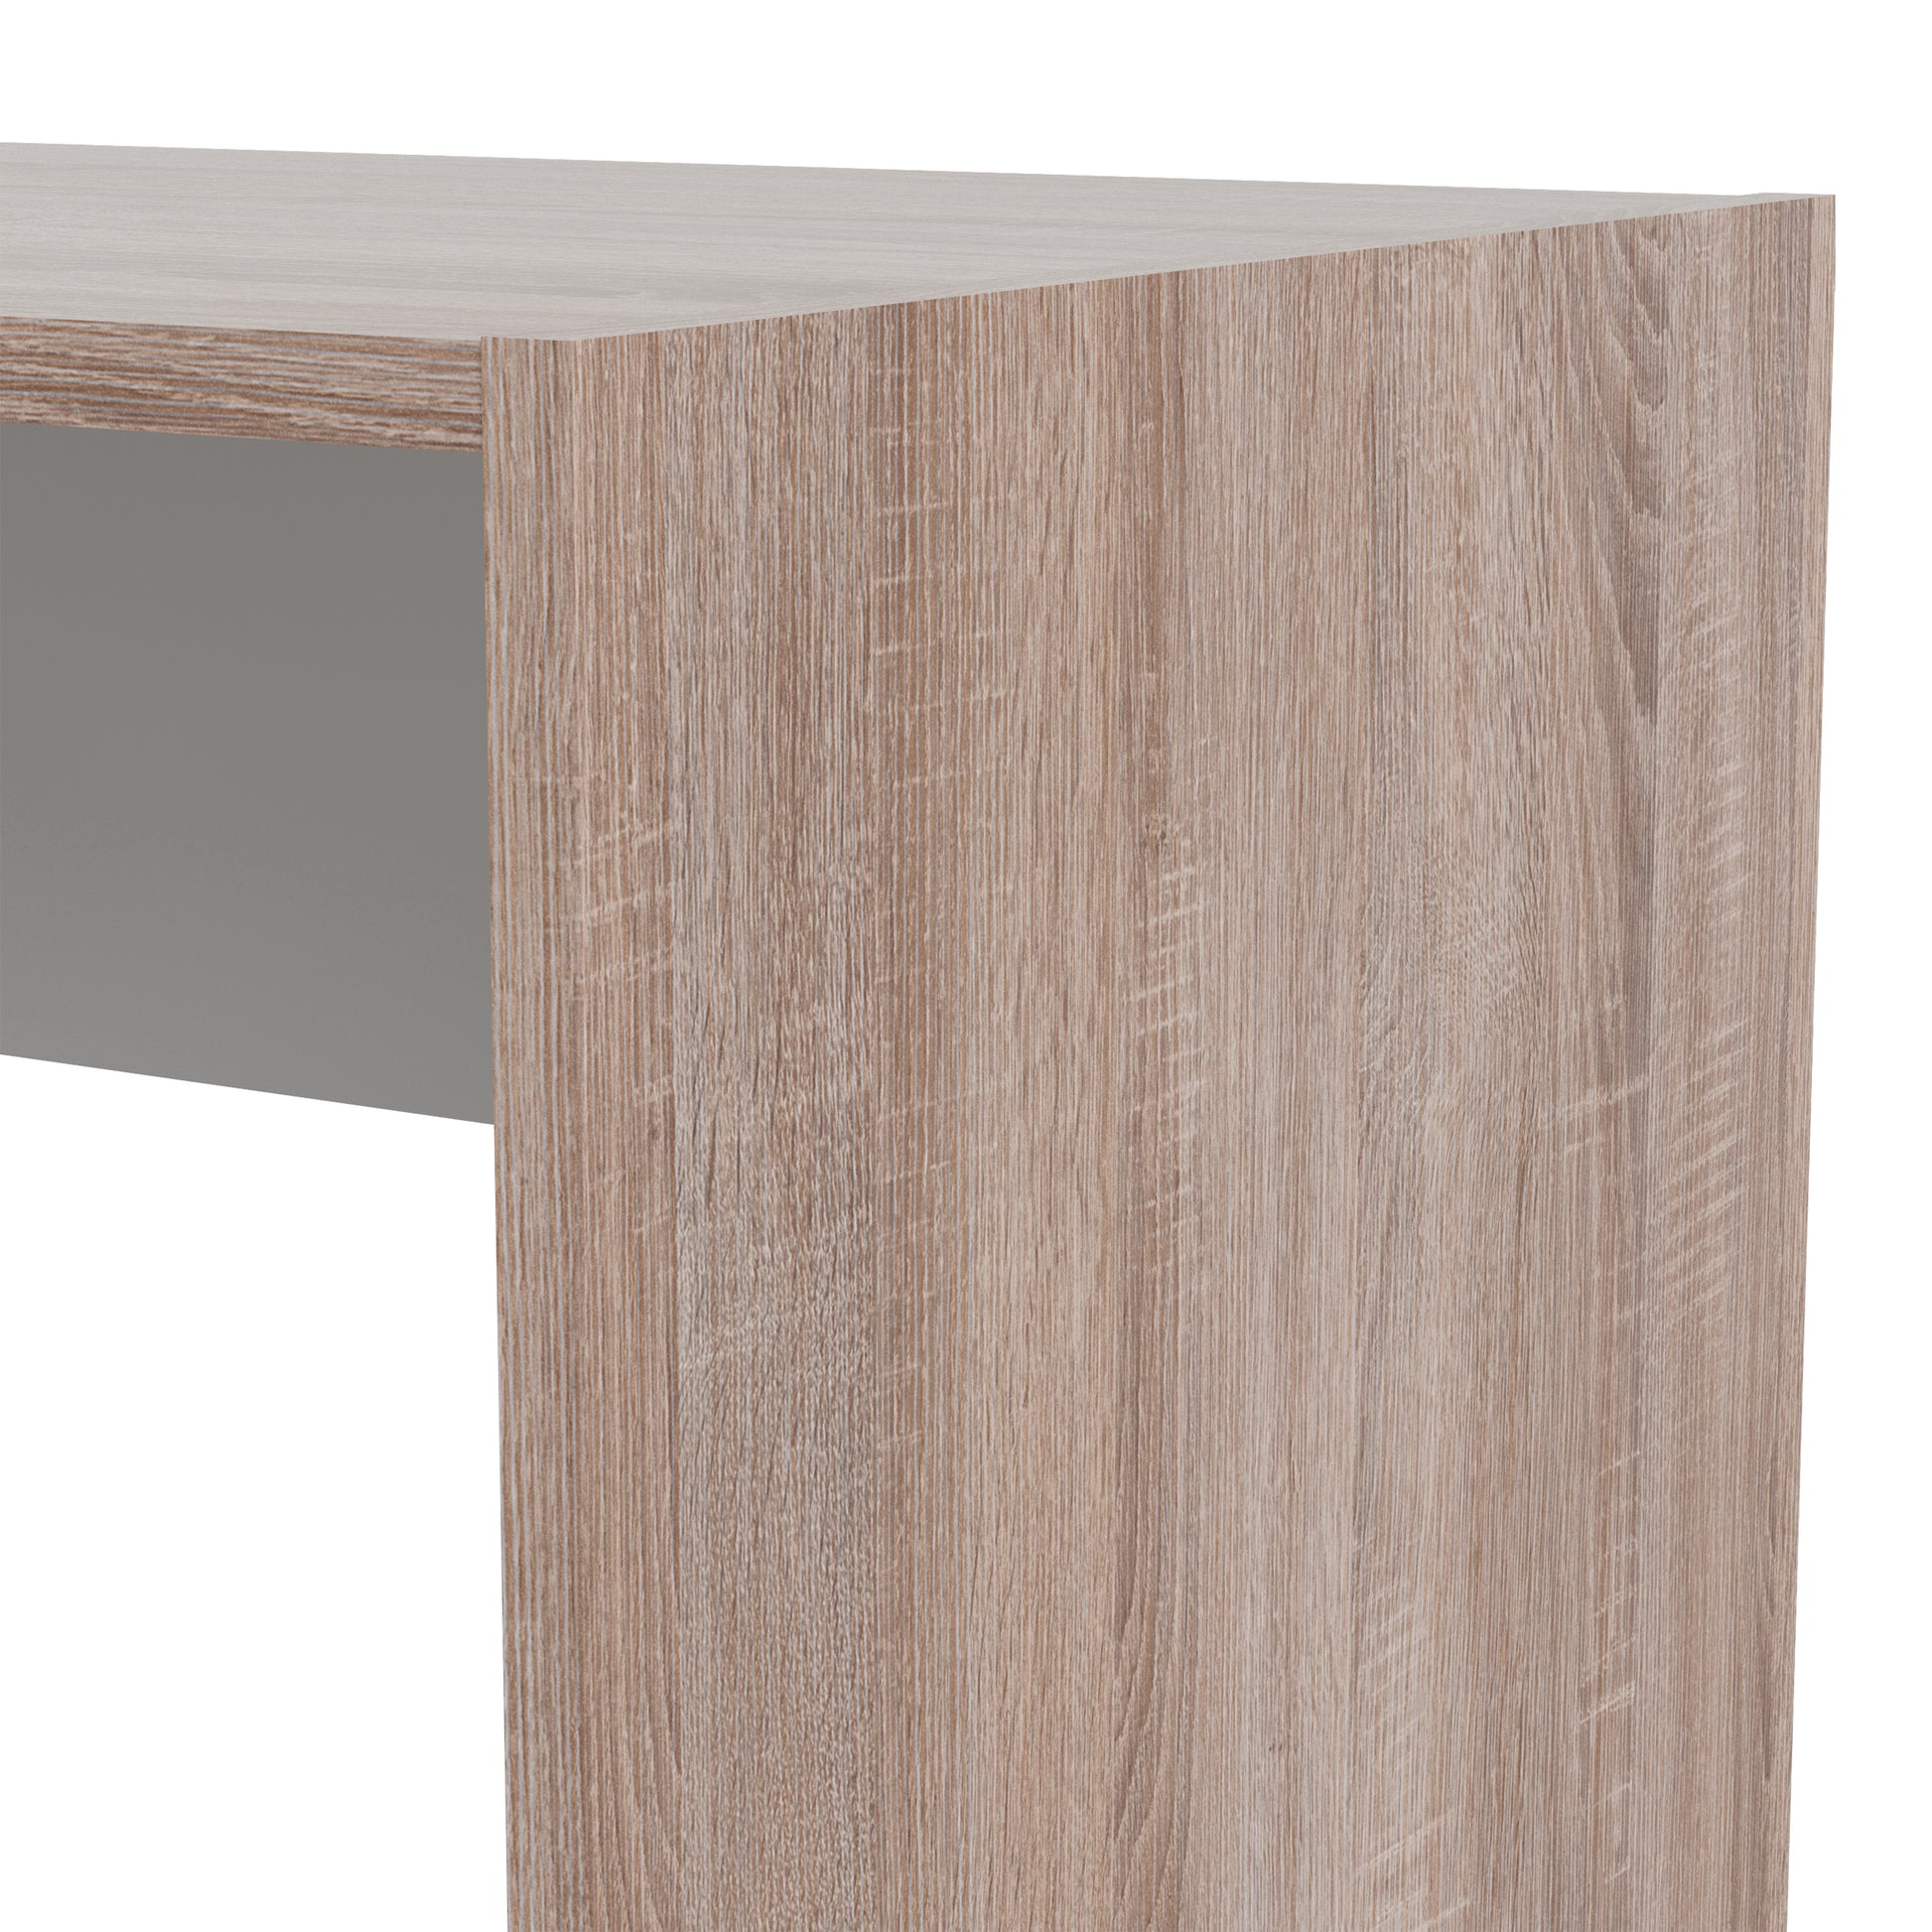 Function Plus  Unit Desk with 6 Shelf Bookcase in White and Truffle Oak